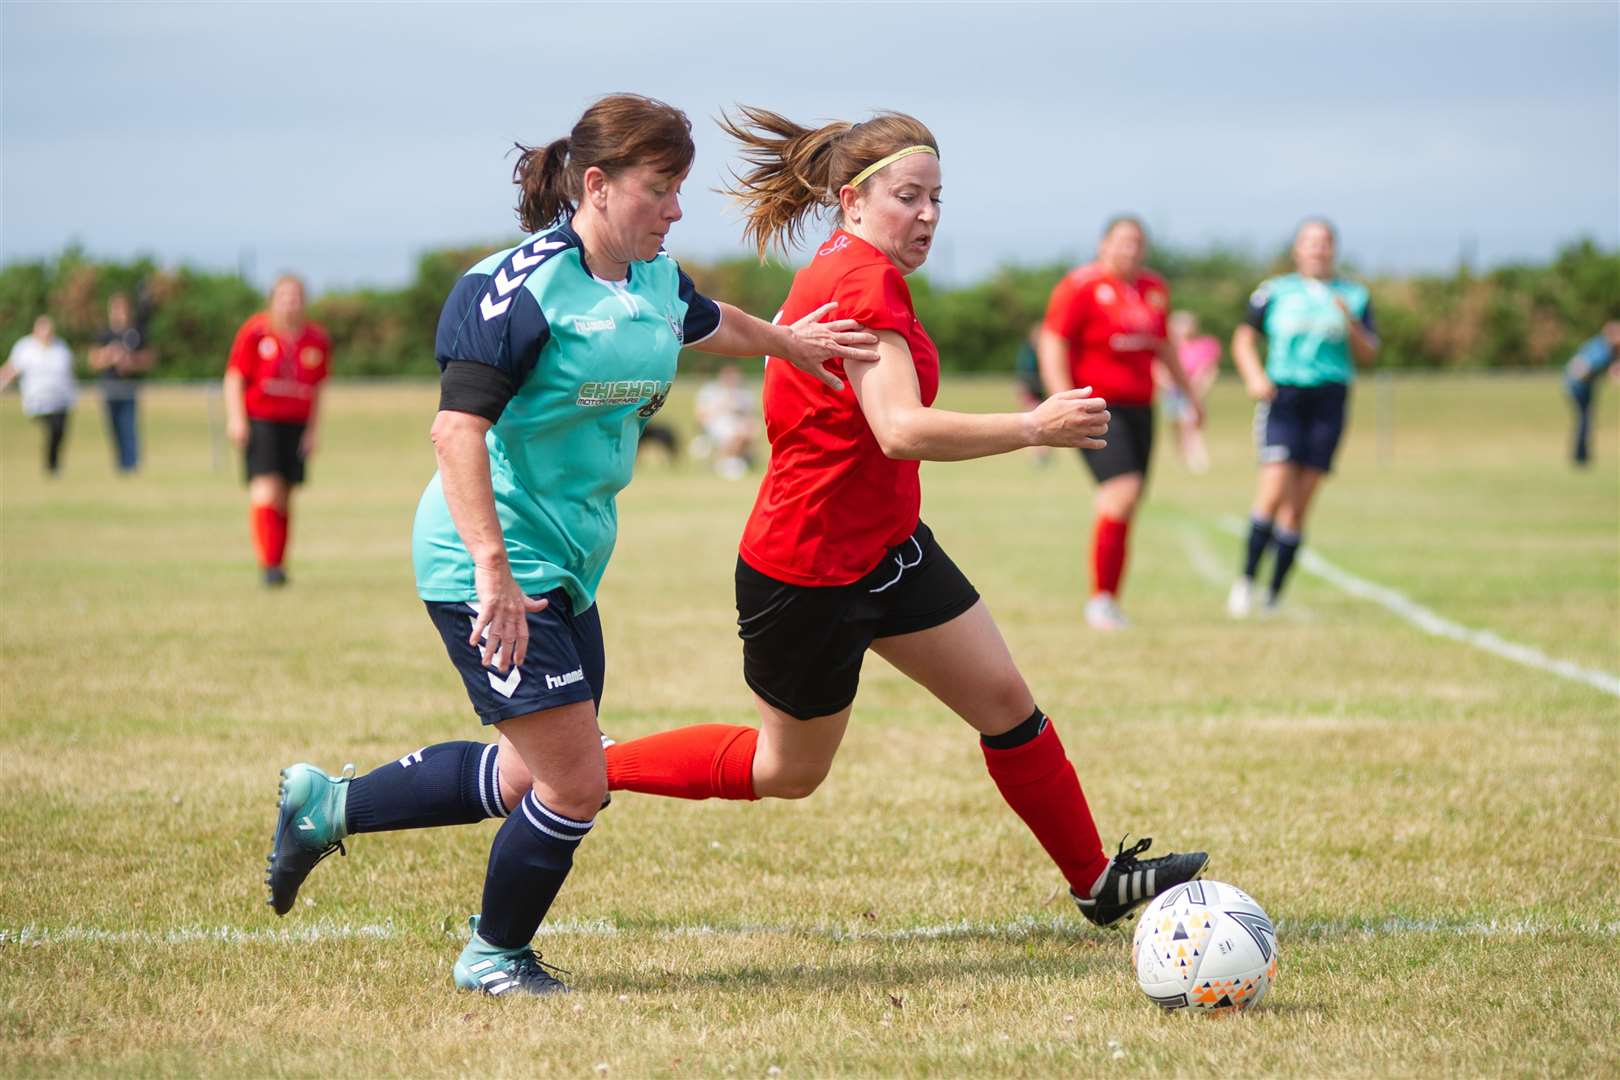 Buckie's Michelle Johnson and Clach's Michaela Munro tussle for the ball. Picture: Daniel Forsyth